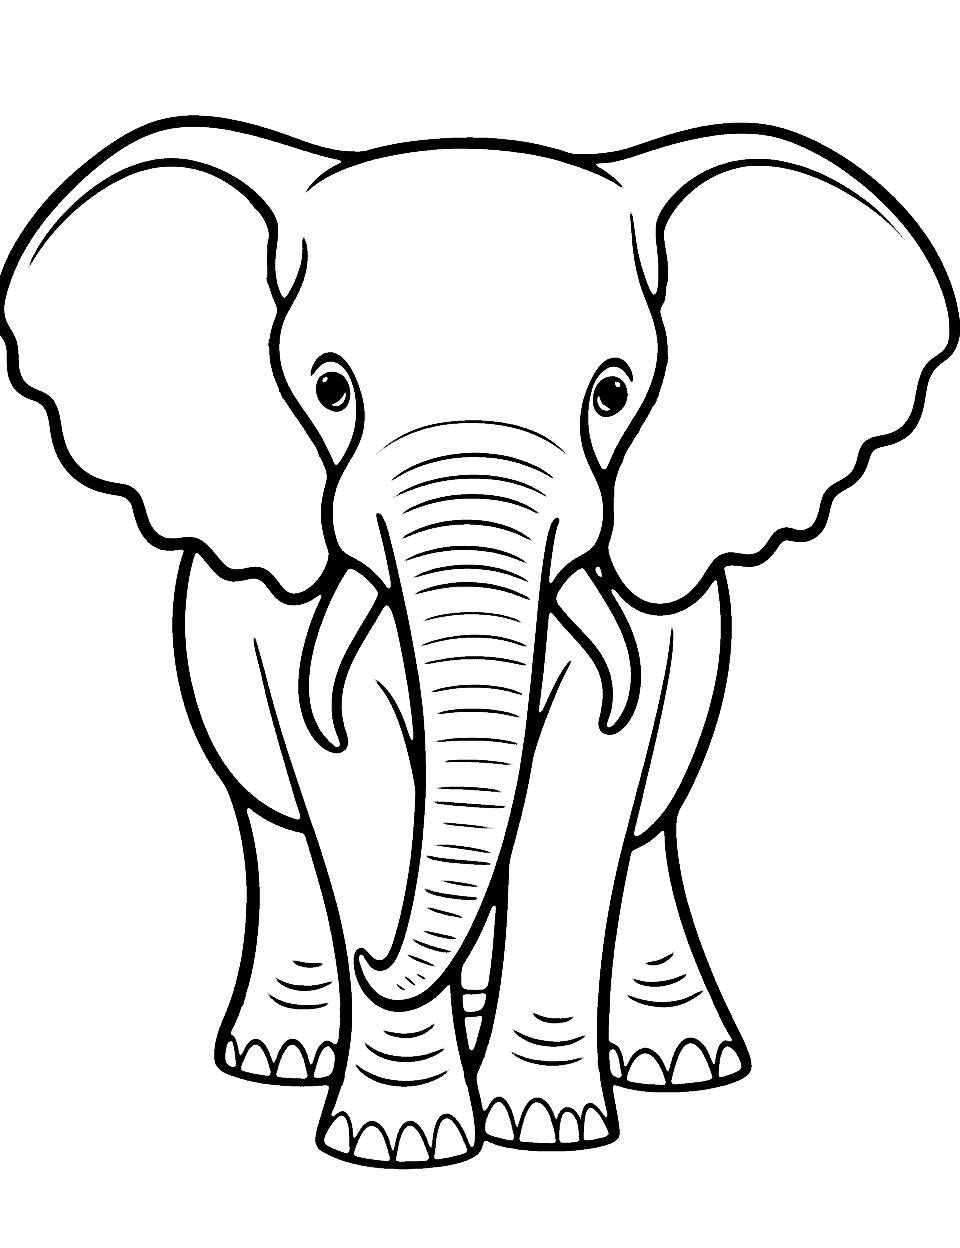 Wise Elephant Animal Coloring Page - A wise and gentle elephant with a calm and peaceful expression.